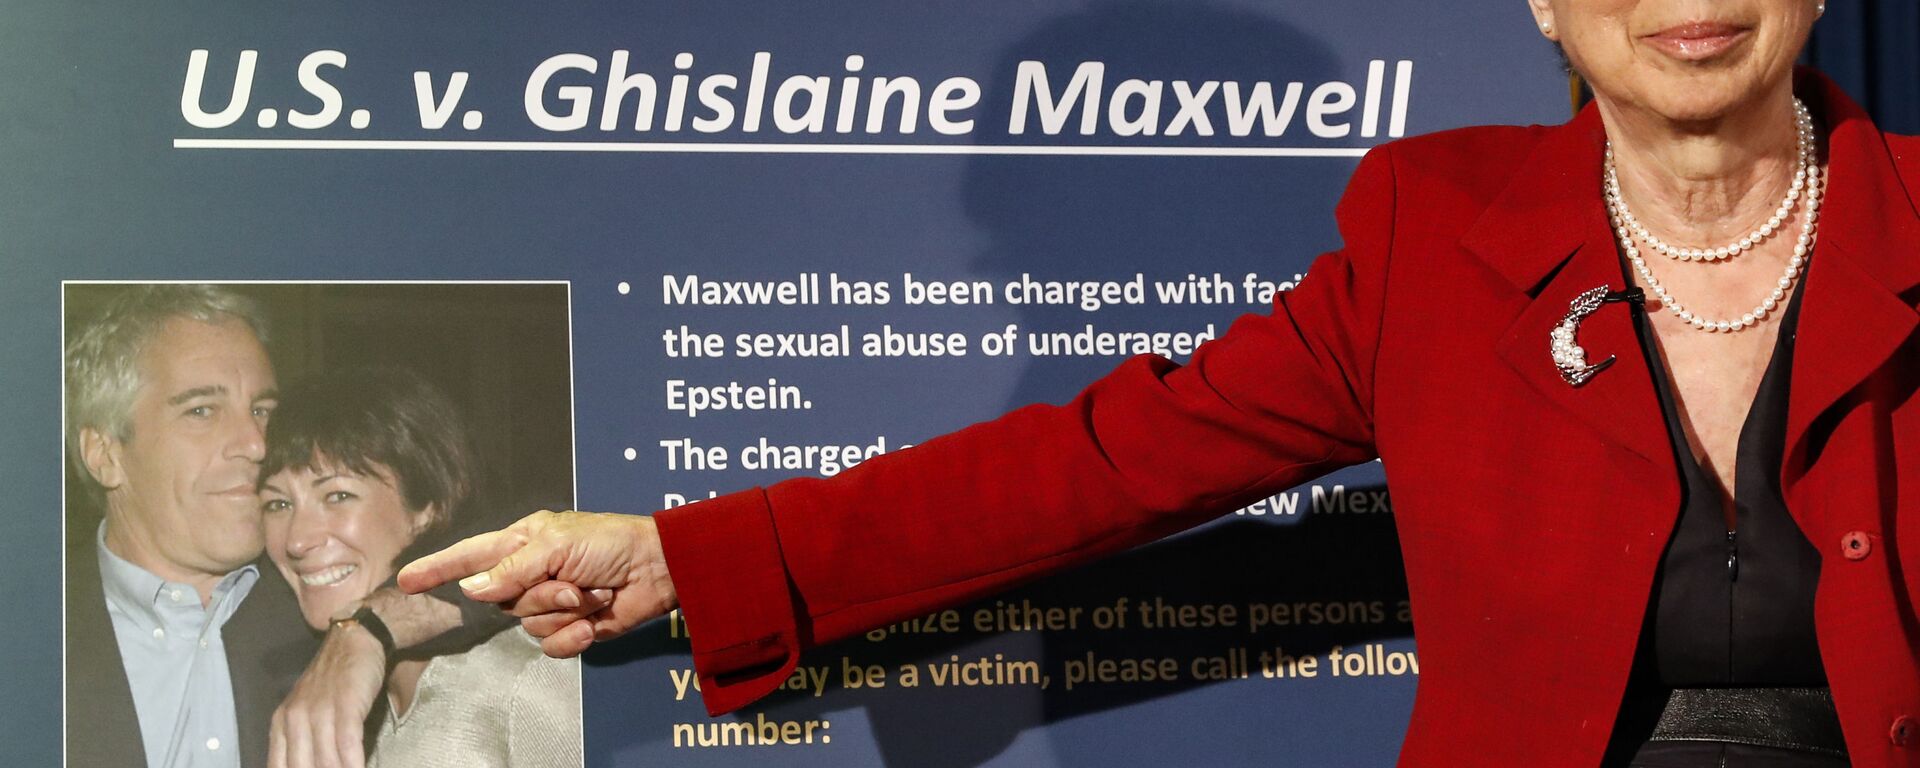 In this Thursday, July 2, 2020, file photo, Audrey Strauss, Acting United States Attorney for the Southern District of New York, gestures as she speaks during a news conference to announce charges against Ghislaine Maxwell for her alleged role in the sexual exploitation and abuse of multiple minor girls by Jeffrey Epstein, in New York - Sputnik International, 1920, 04.10.2021